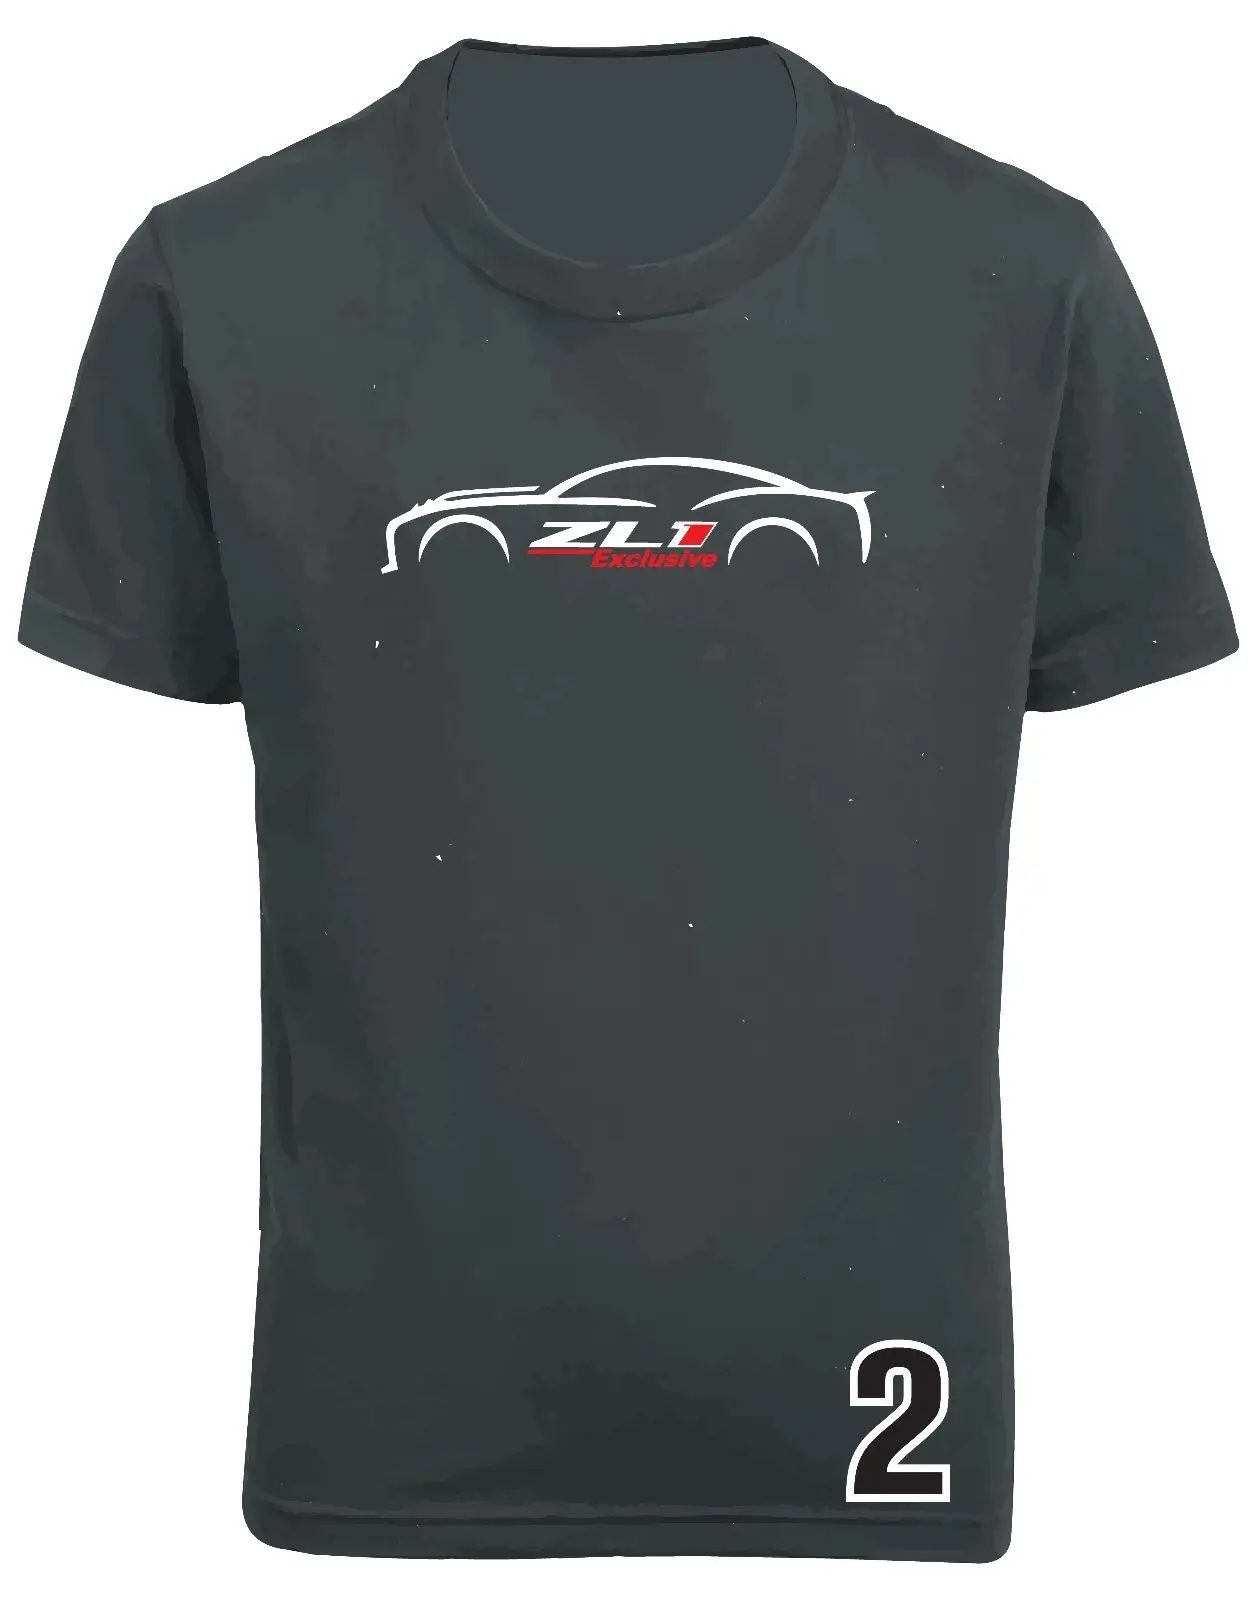 

2019 New Hot Sale T-shirt ZL1 EXCLUSIVE Black Graphic T-shirt Tee American Muscle Car CAMARO SS RS Z28 Unisex Tee Shirts